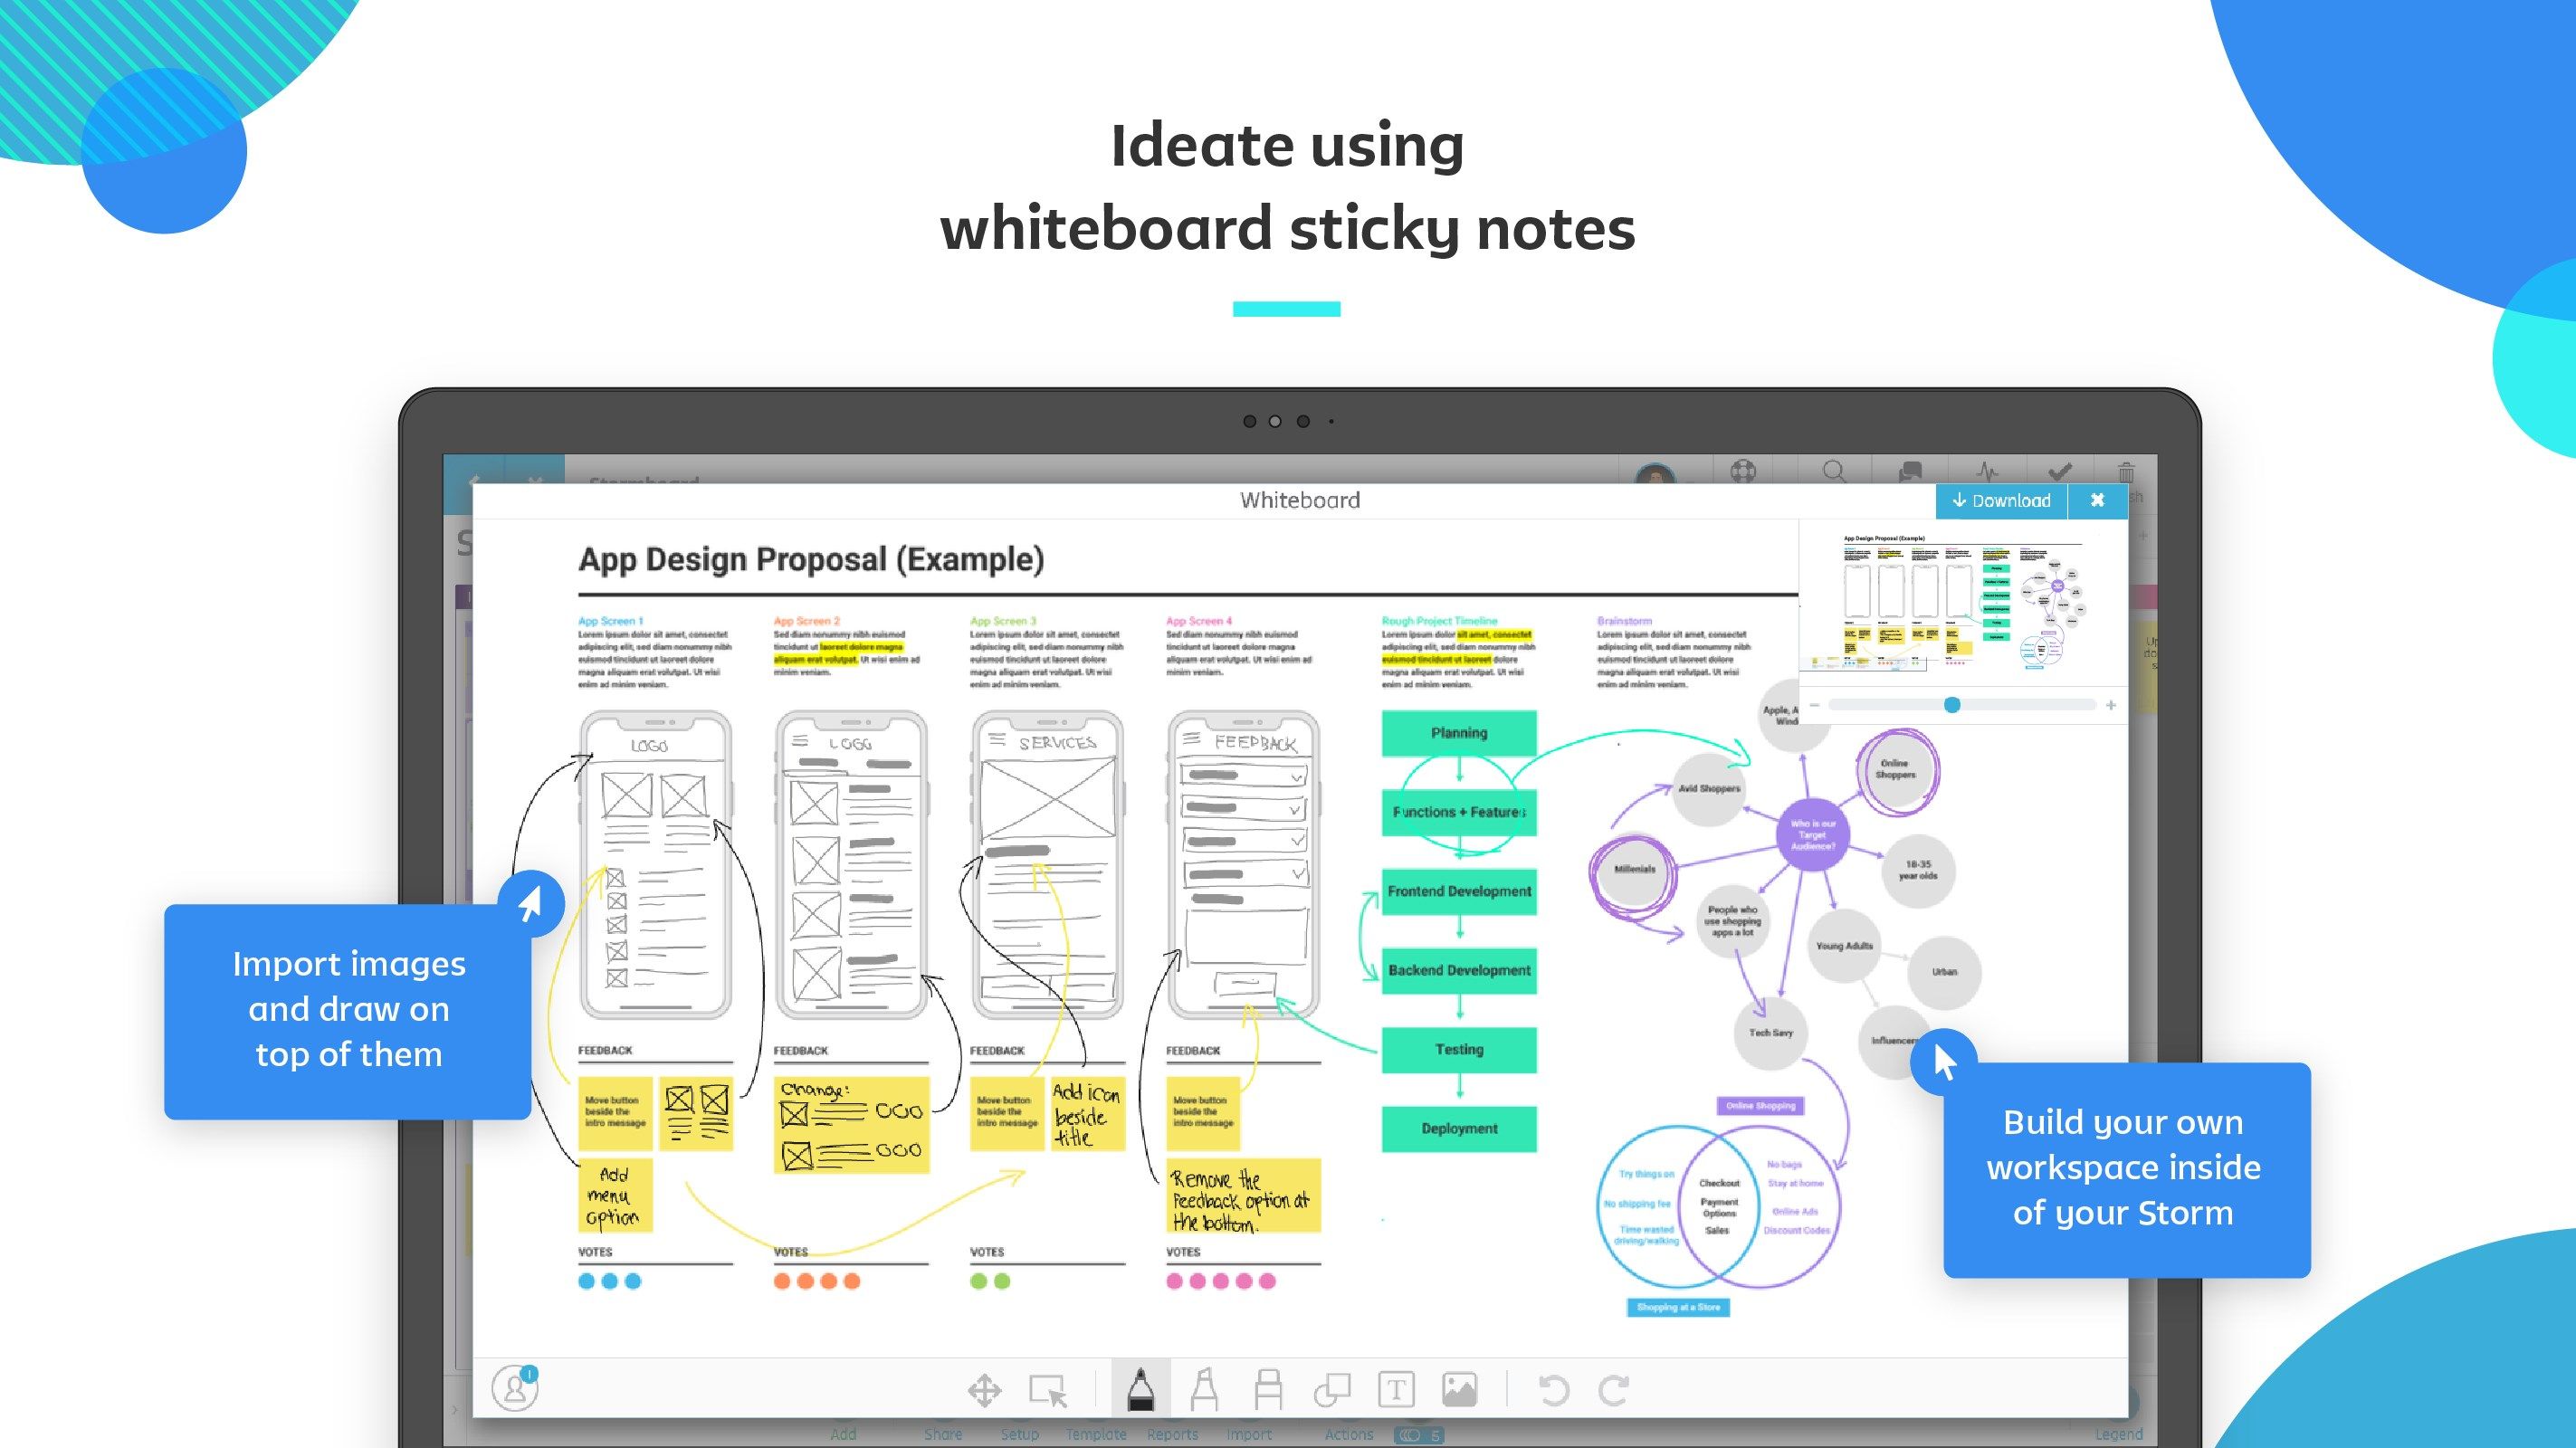 Ideate using whiteboard sticky notes